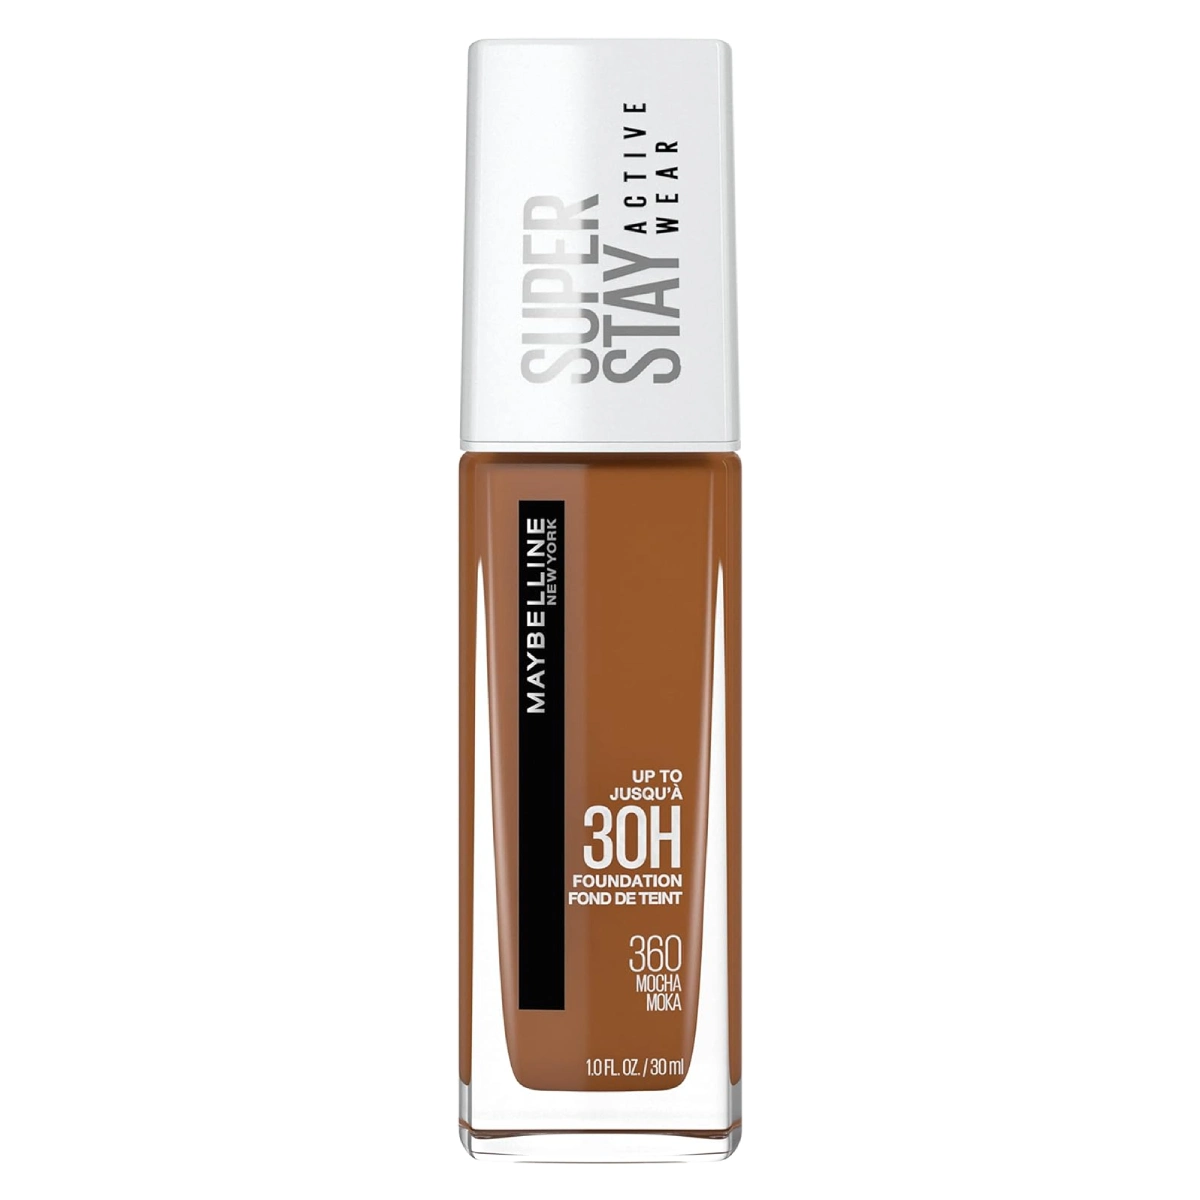 Maybelline Super Stay Full Coverage Foundation - A bottle of foundation against a white background